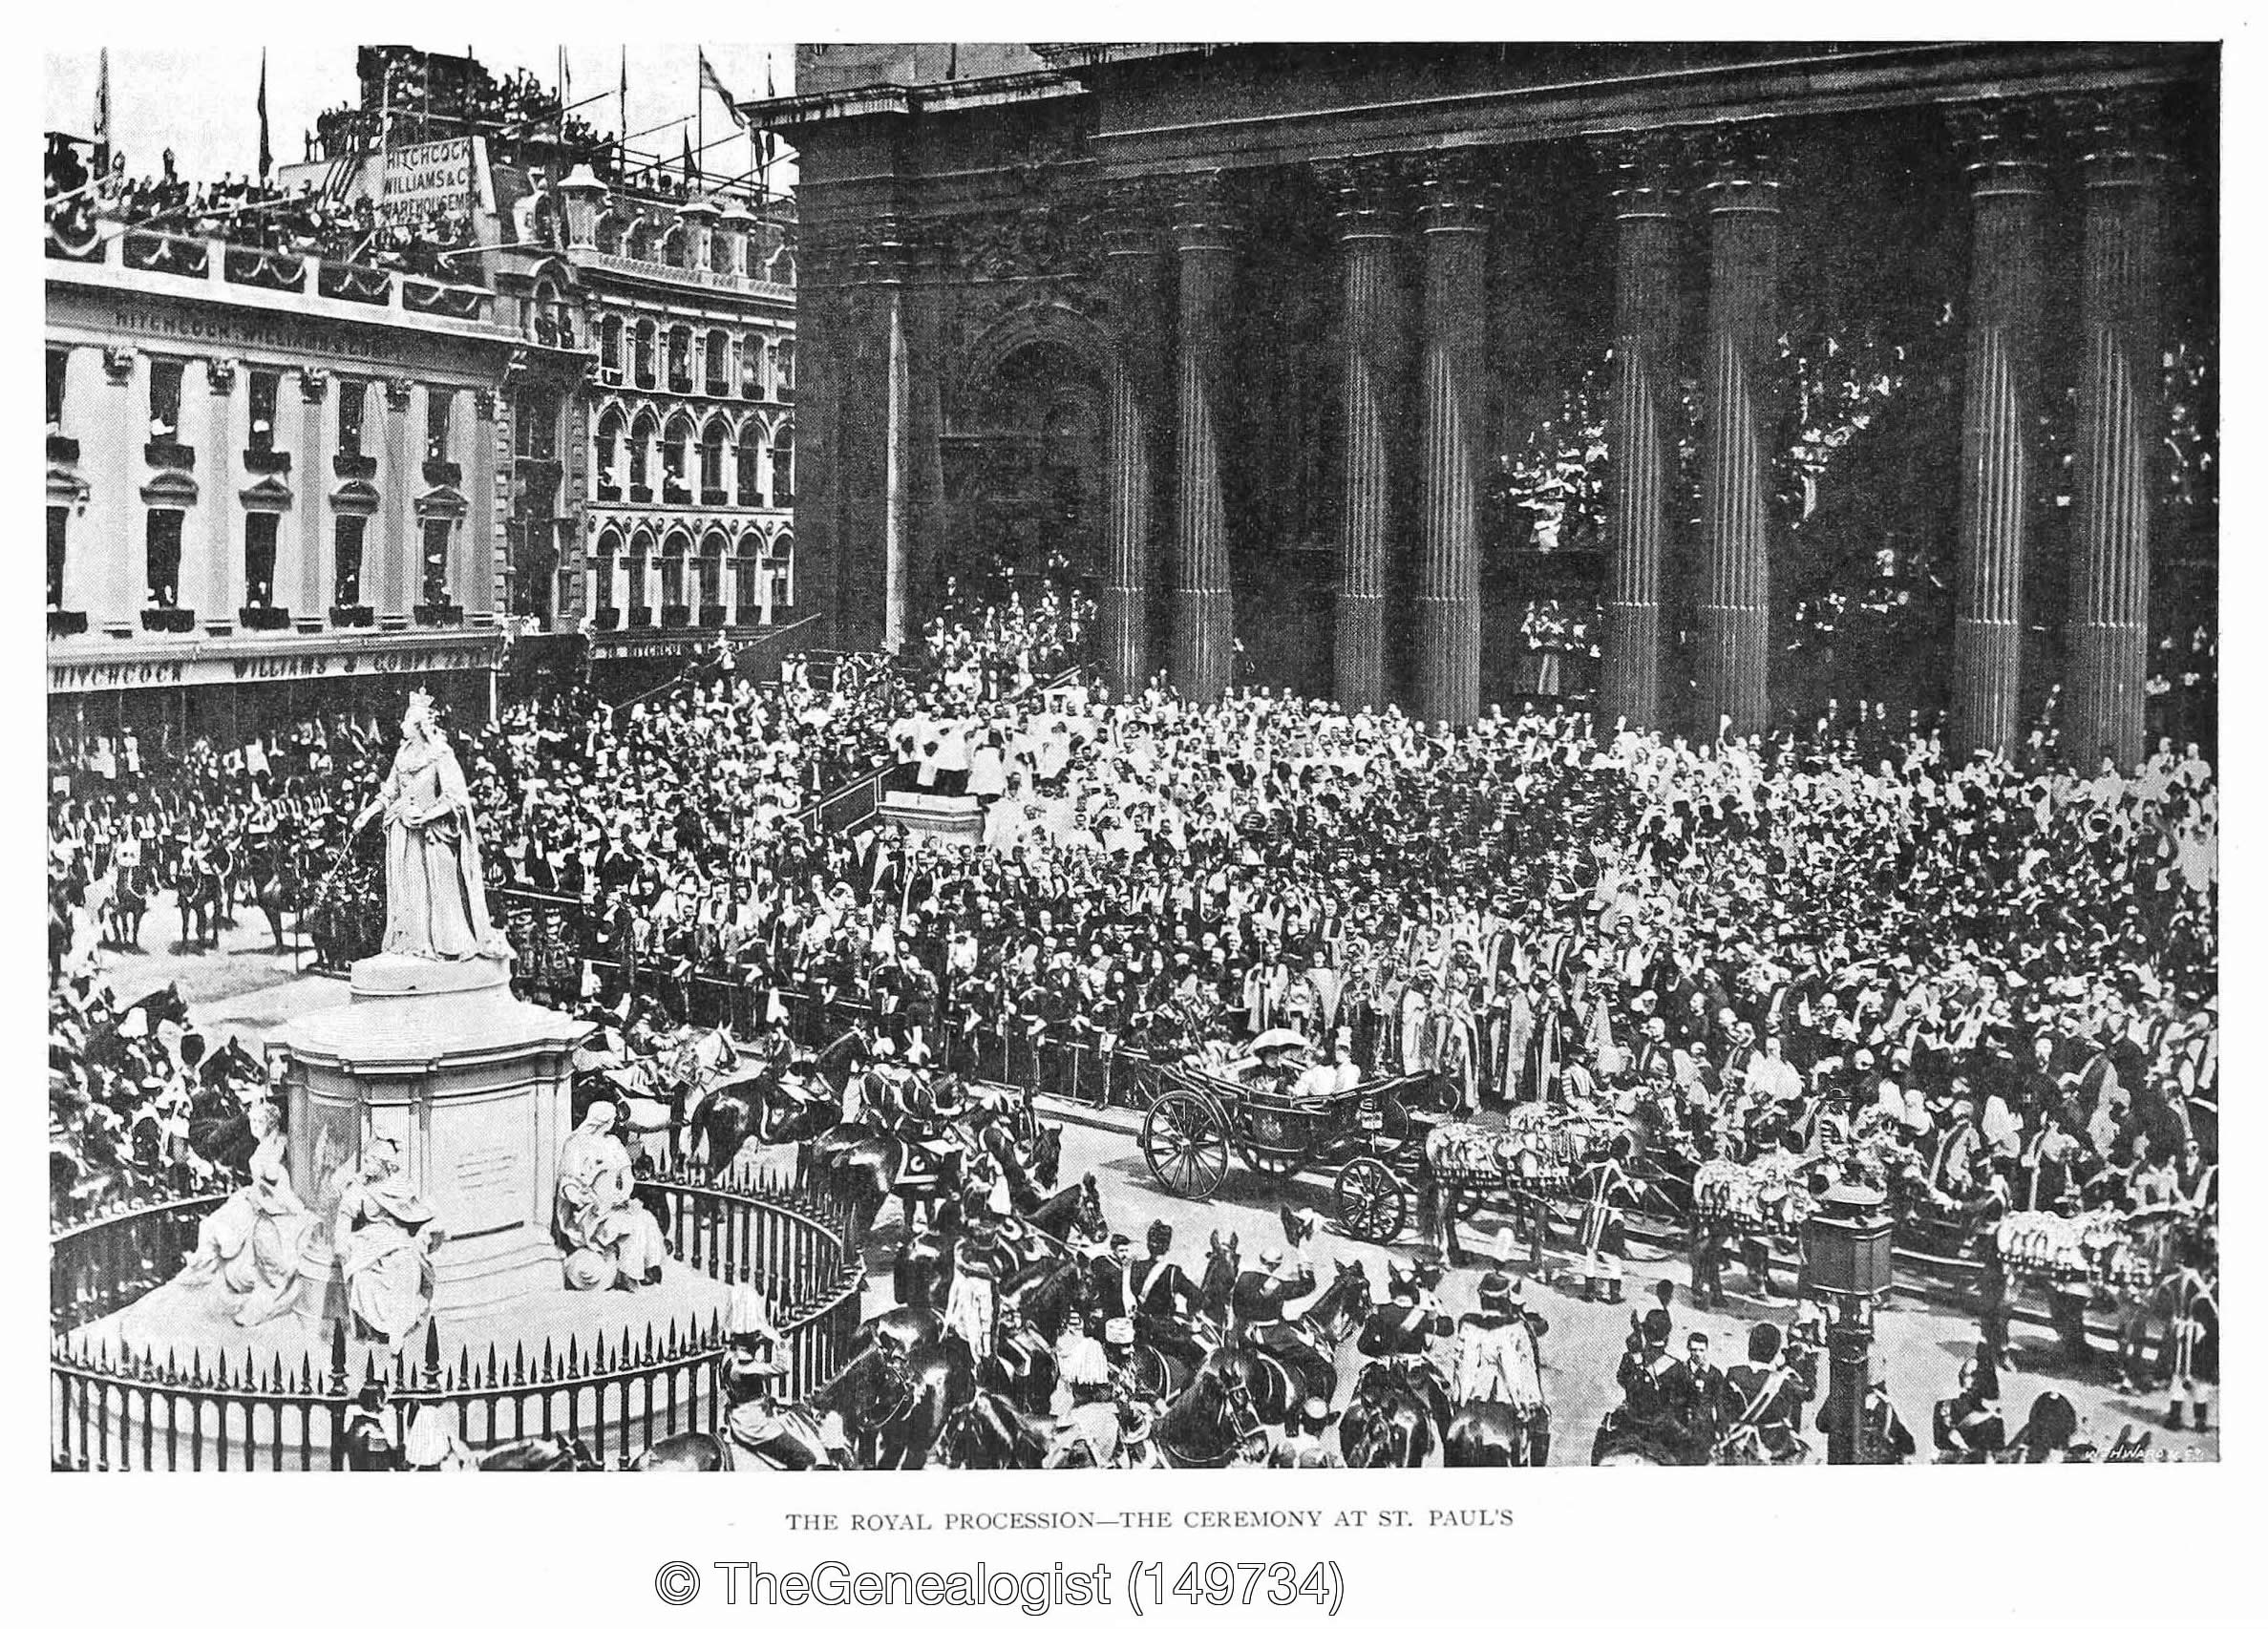 Photograph of the steps to St Paul's 1897 from The Queen's Reign found in the Peerage, Gentry & Royalty Records